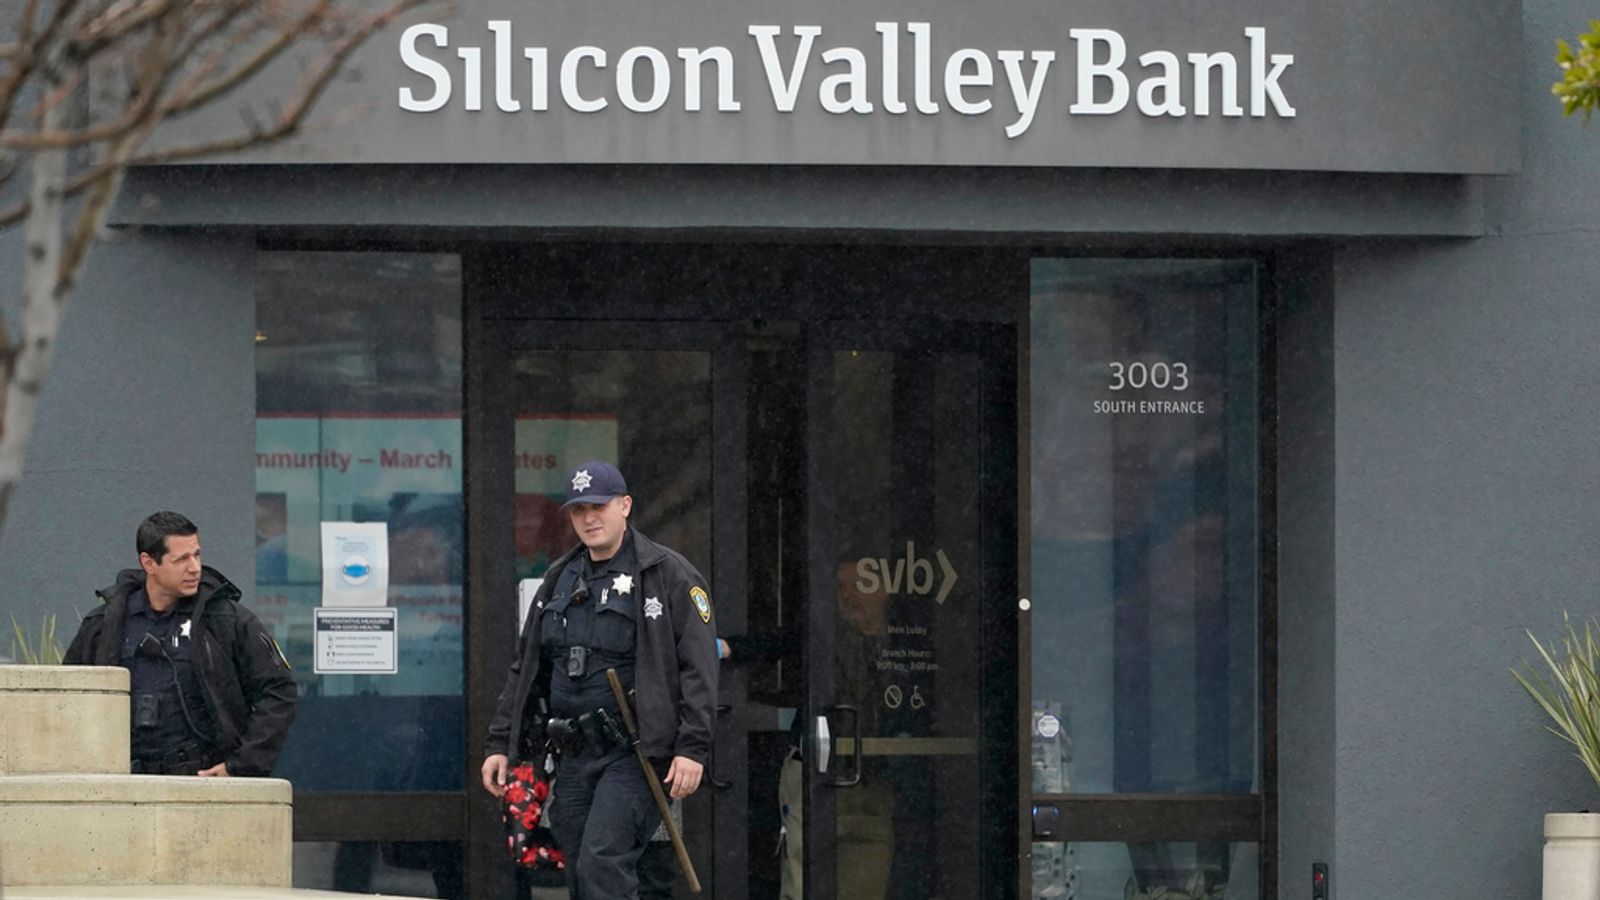 Silicon Valley Bank collapse: US government assures depositors of access to money in bid to stop financial crisis